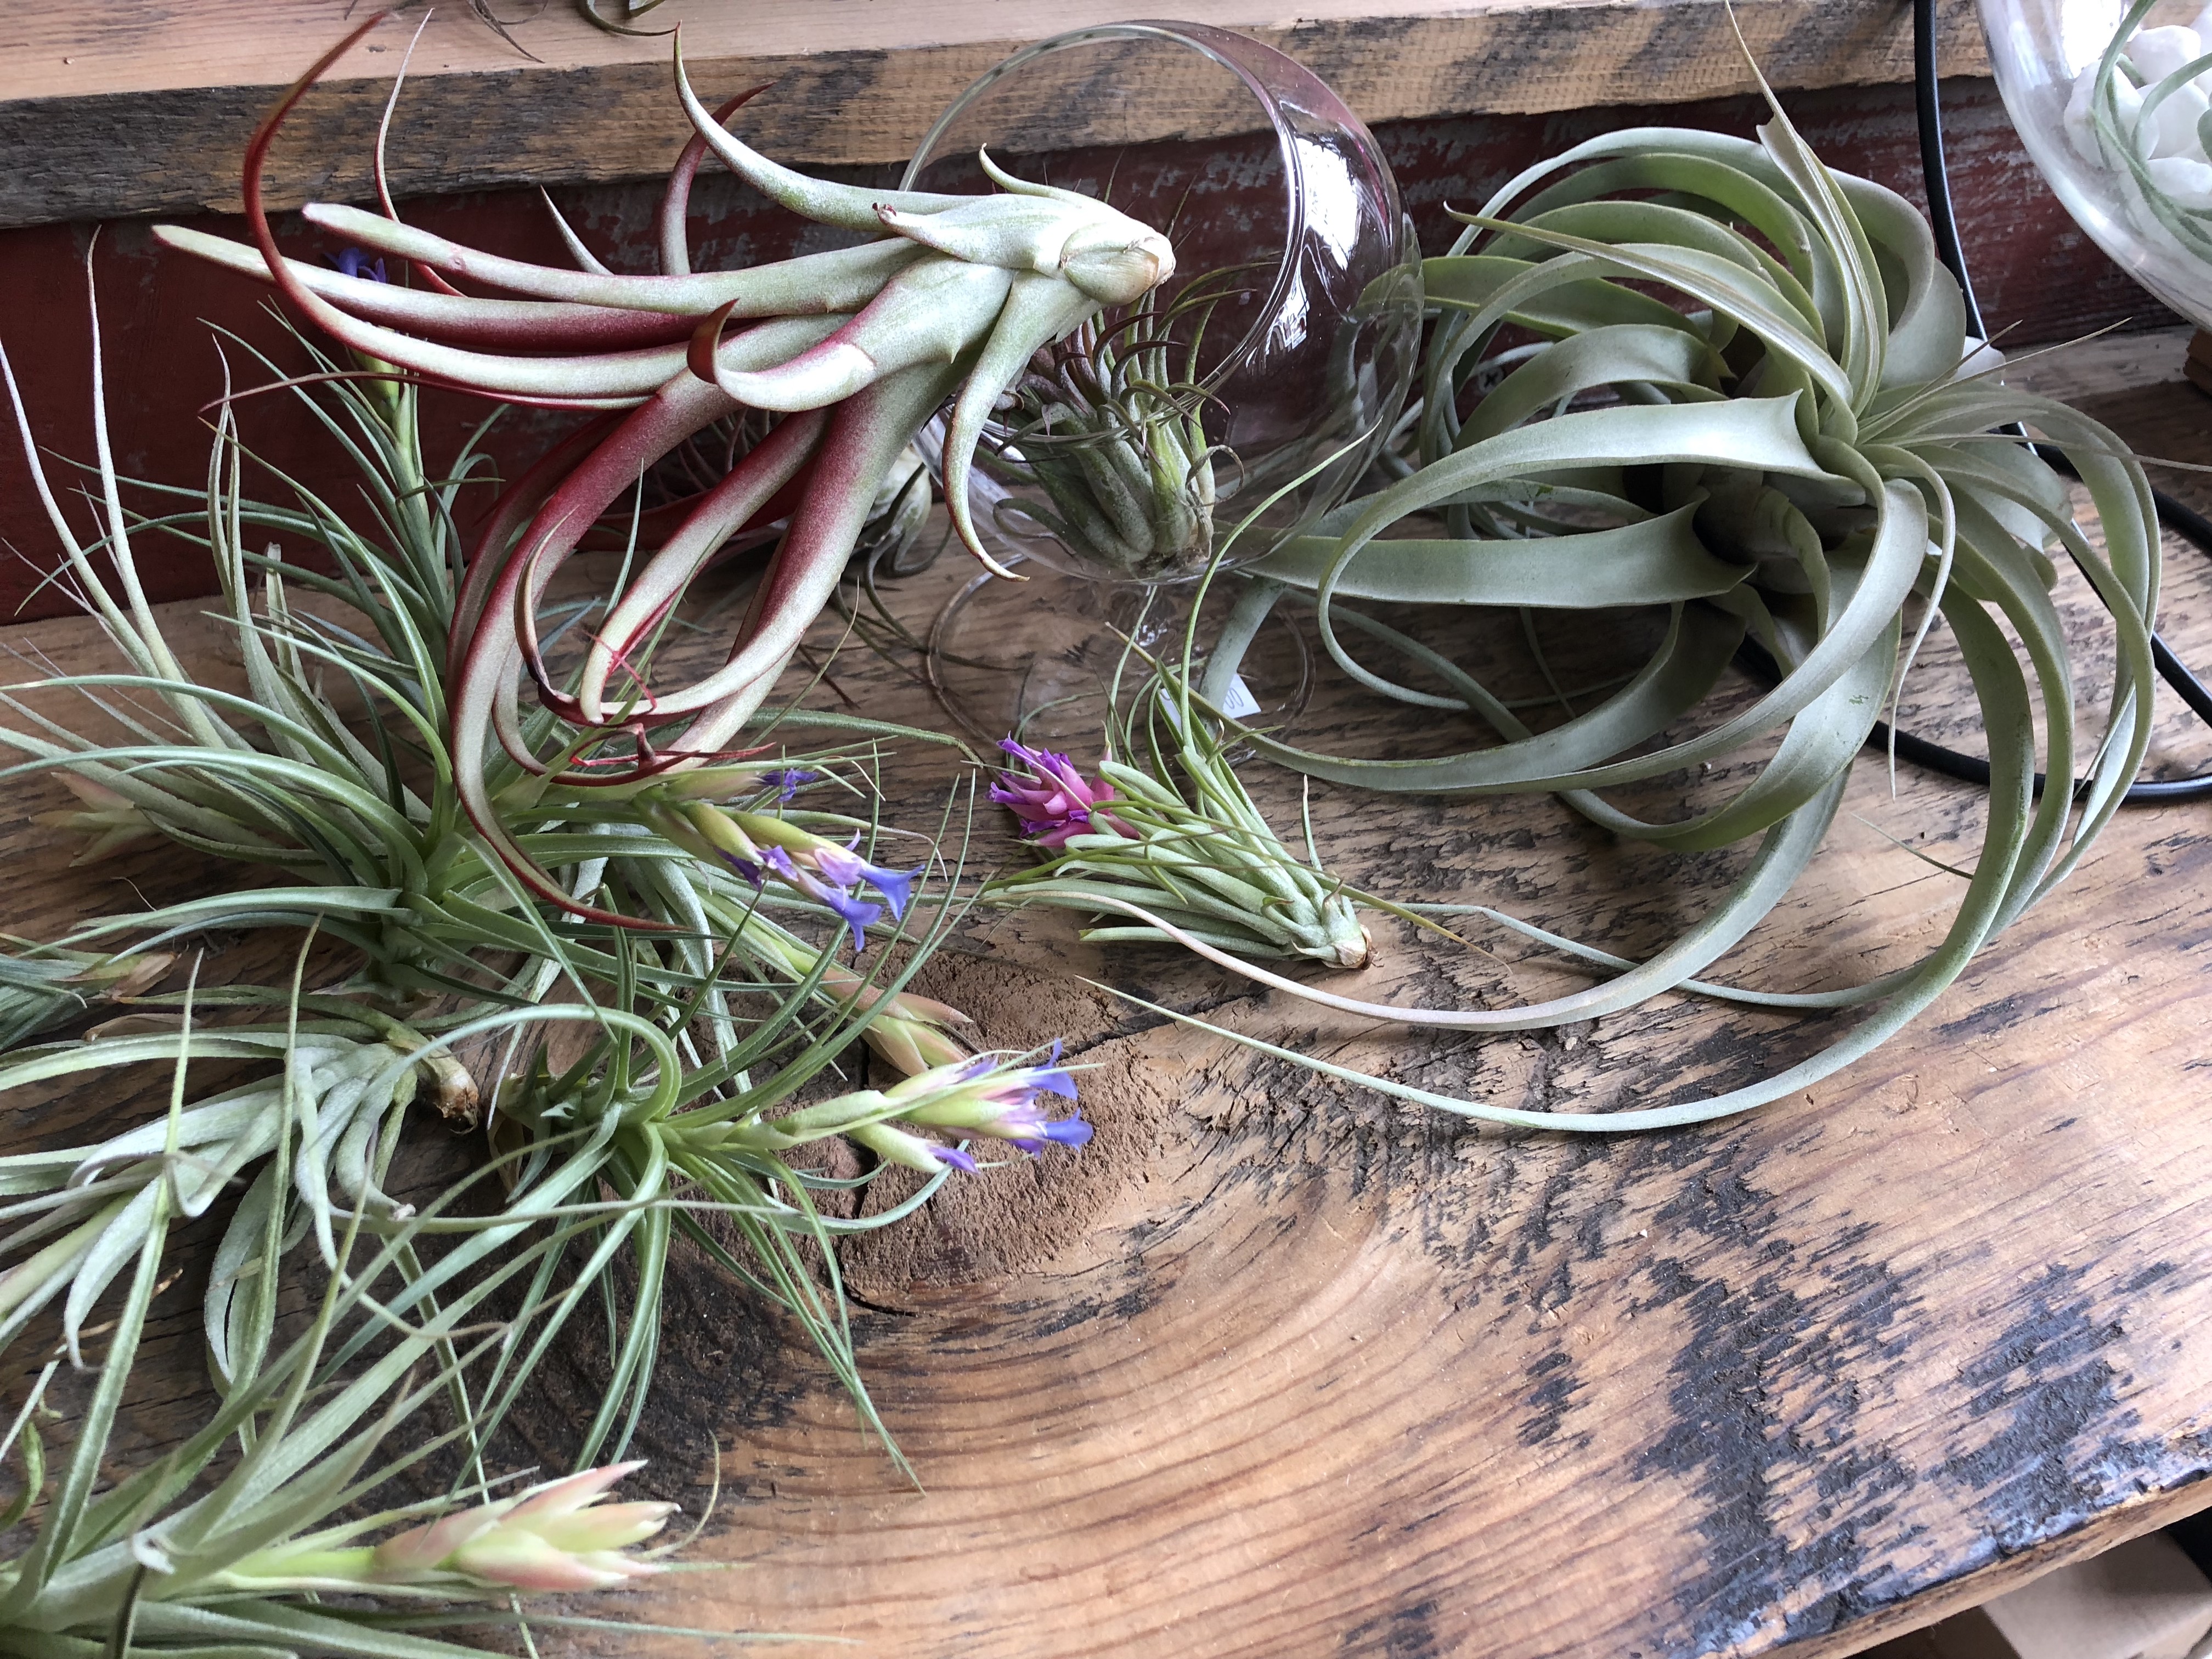 https://www.sunset.com/wp-content/uploads/group-of-air-plants-Getty-0621.jpg